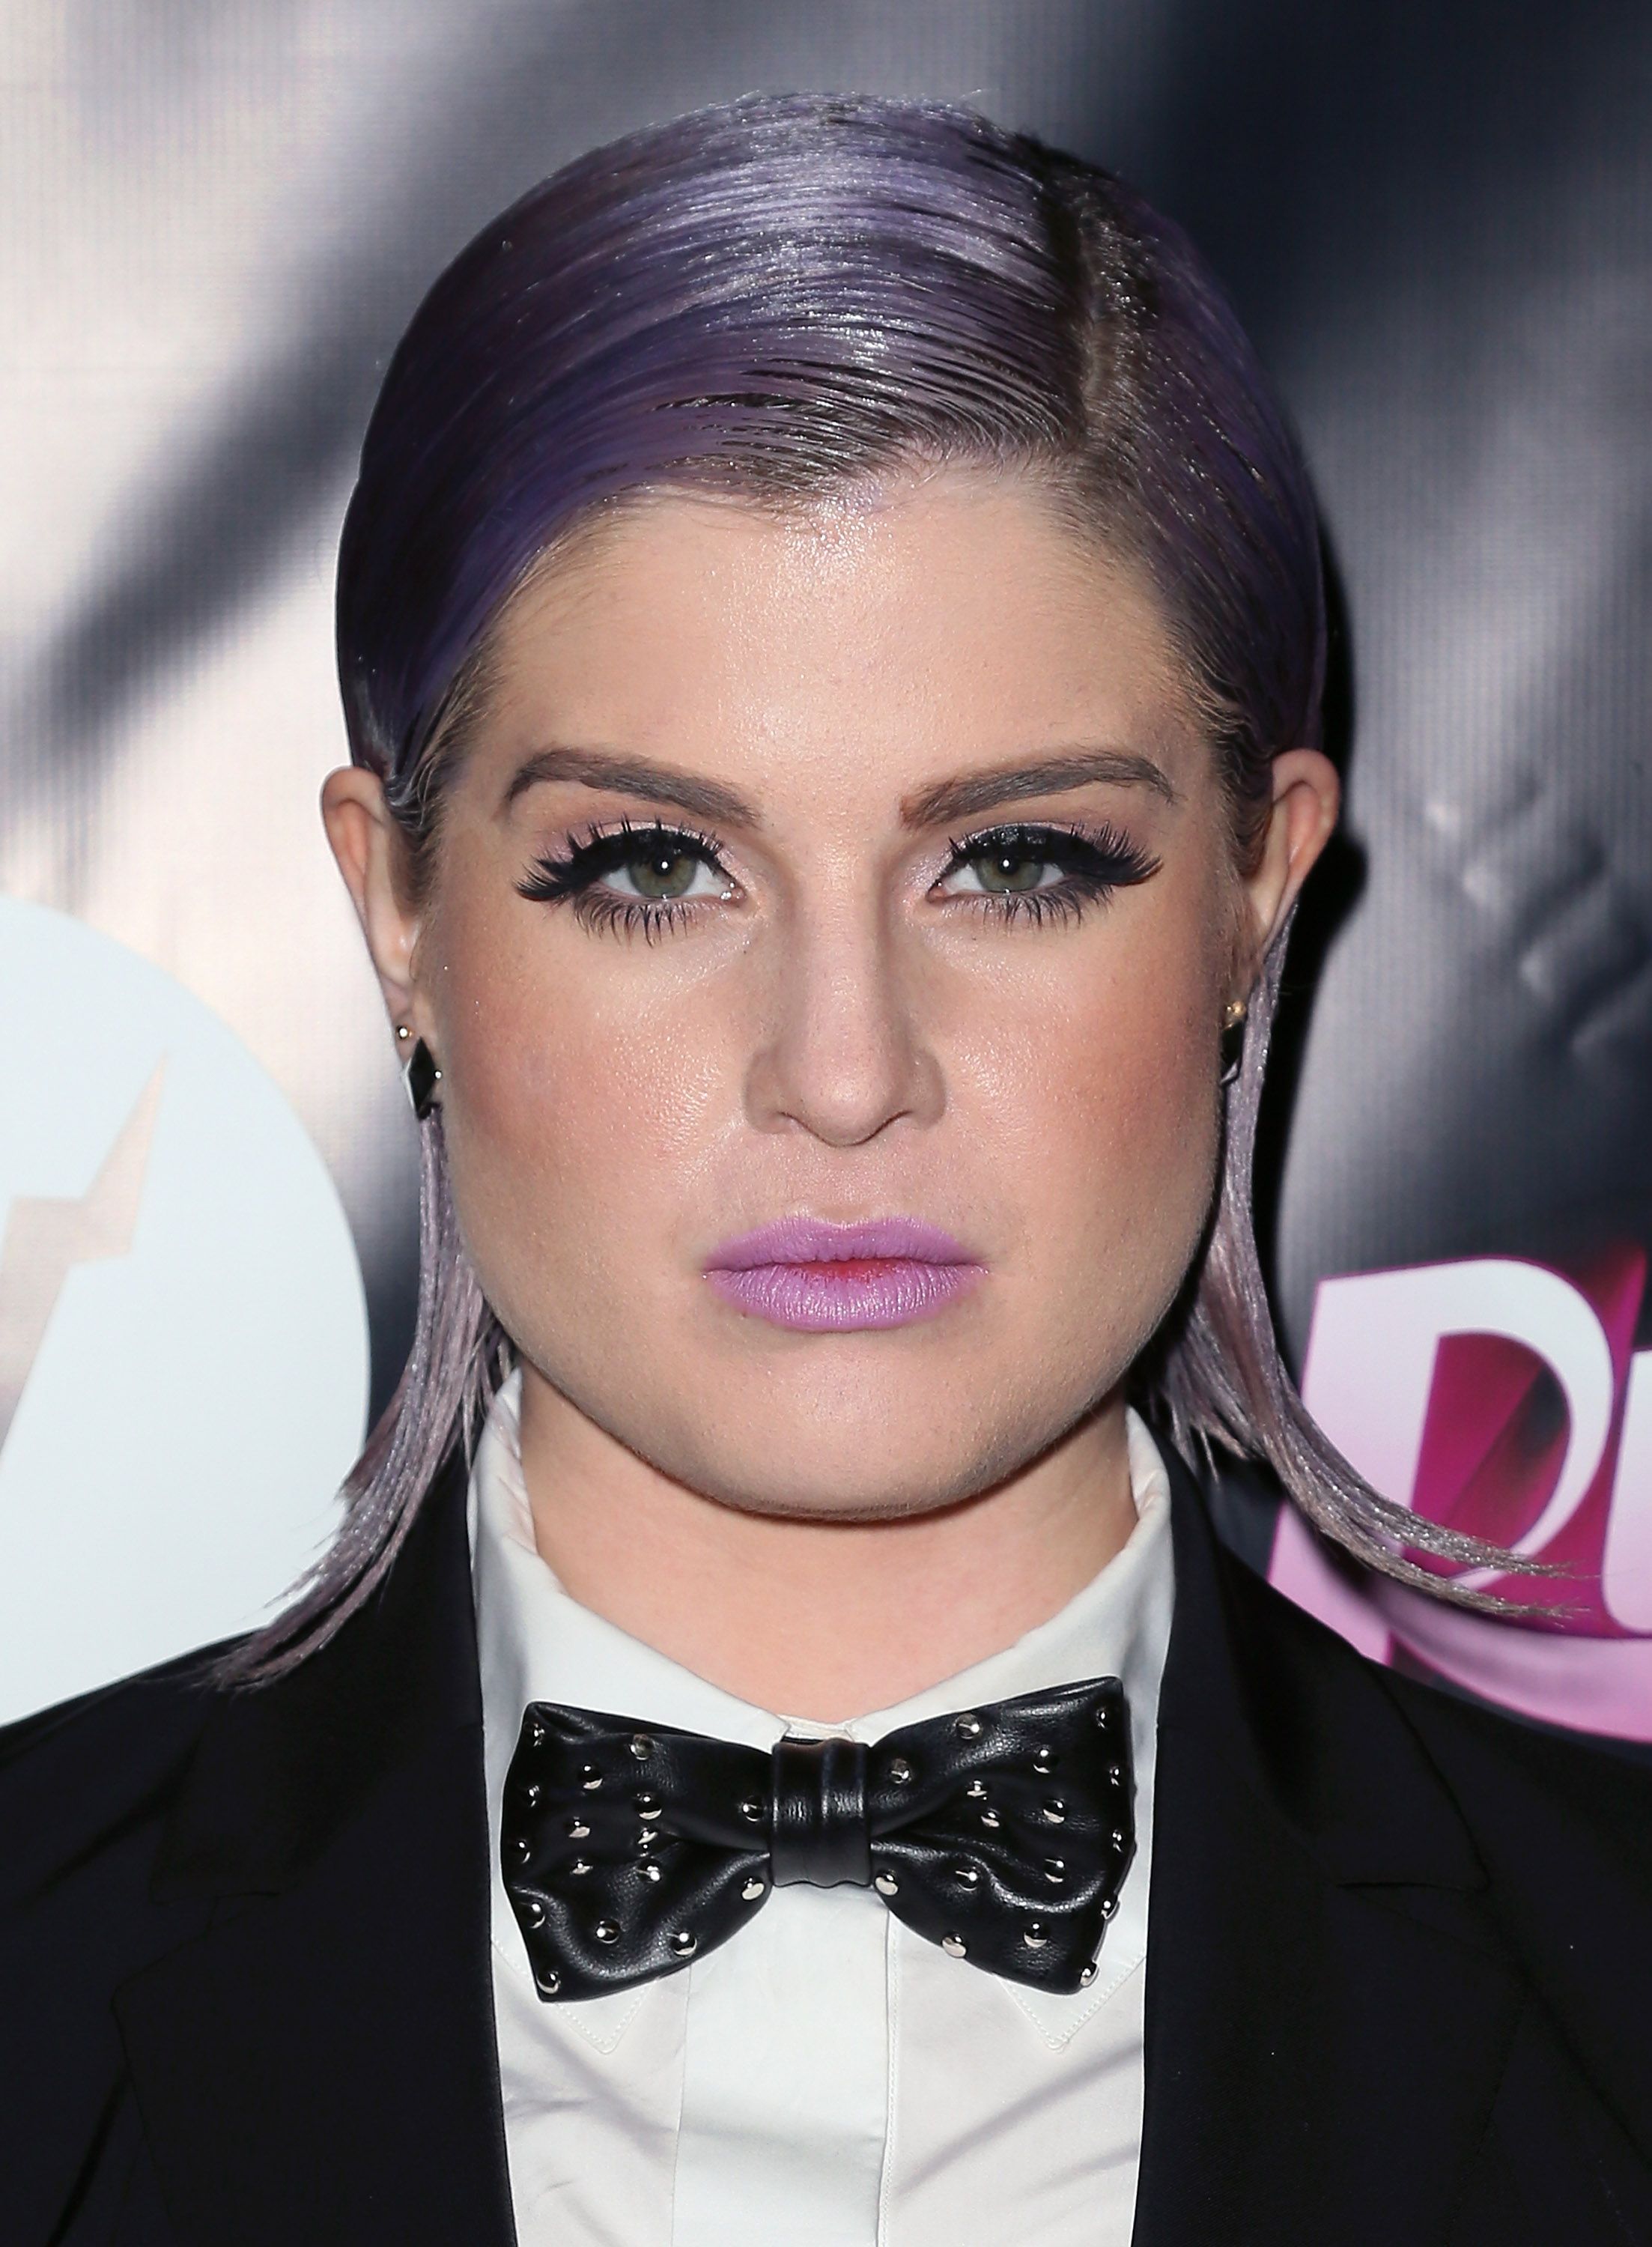 Kelly Osbourne at the "RuPaul's Drag Race" Season 6 premiere party at The Roosevelt Hotel on February 17, 2014 in Hollywood, California | Photo: Getty Images